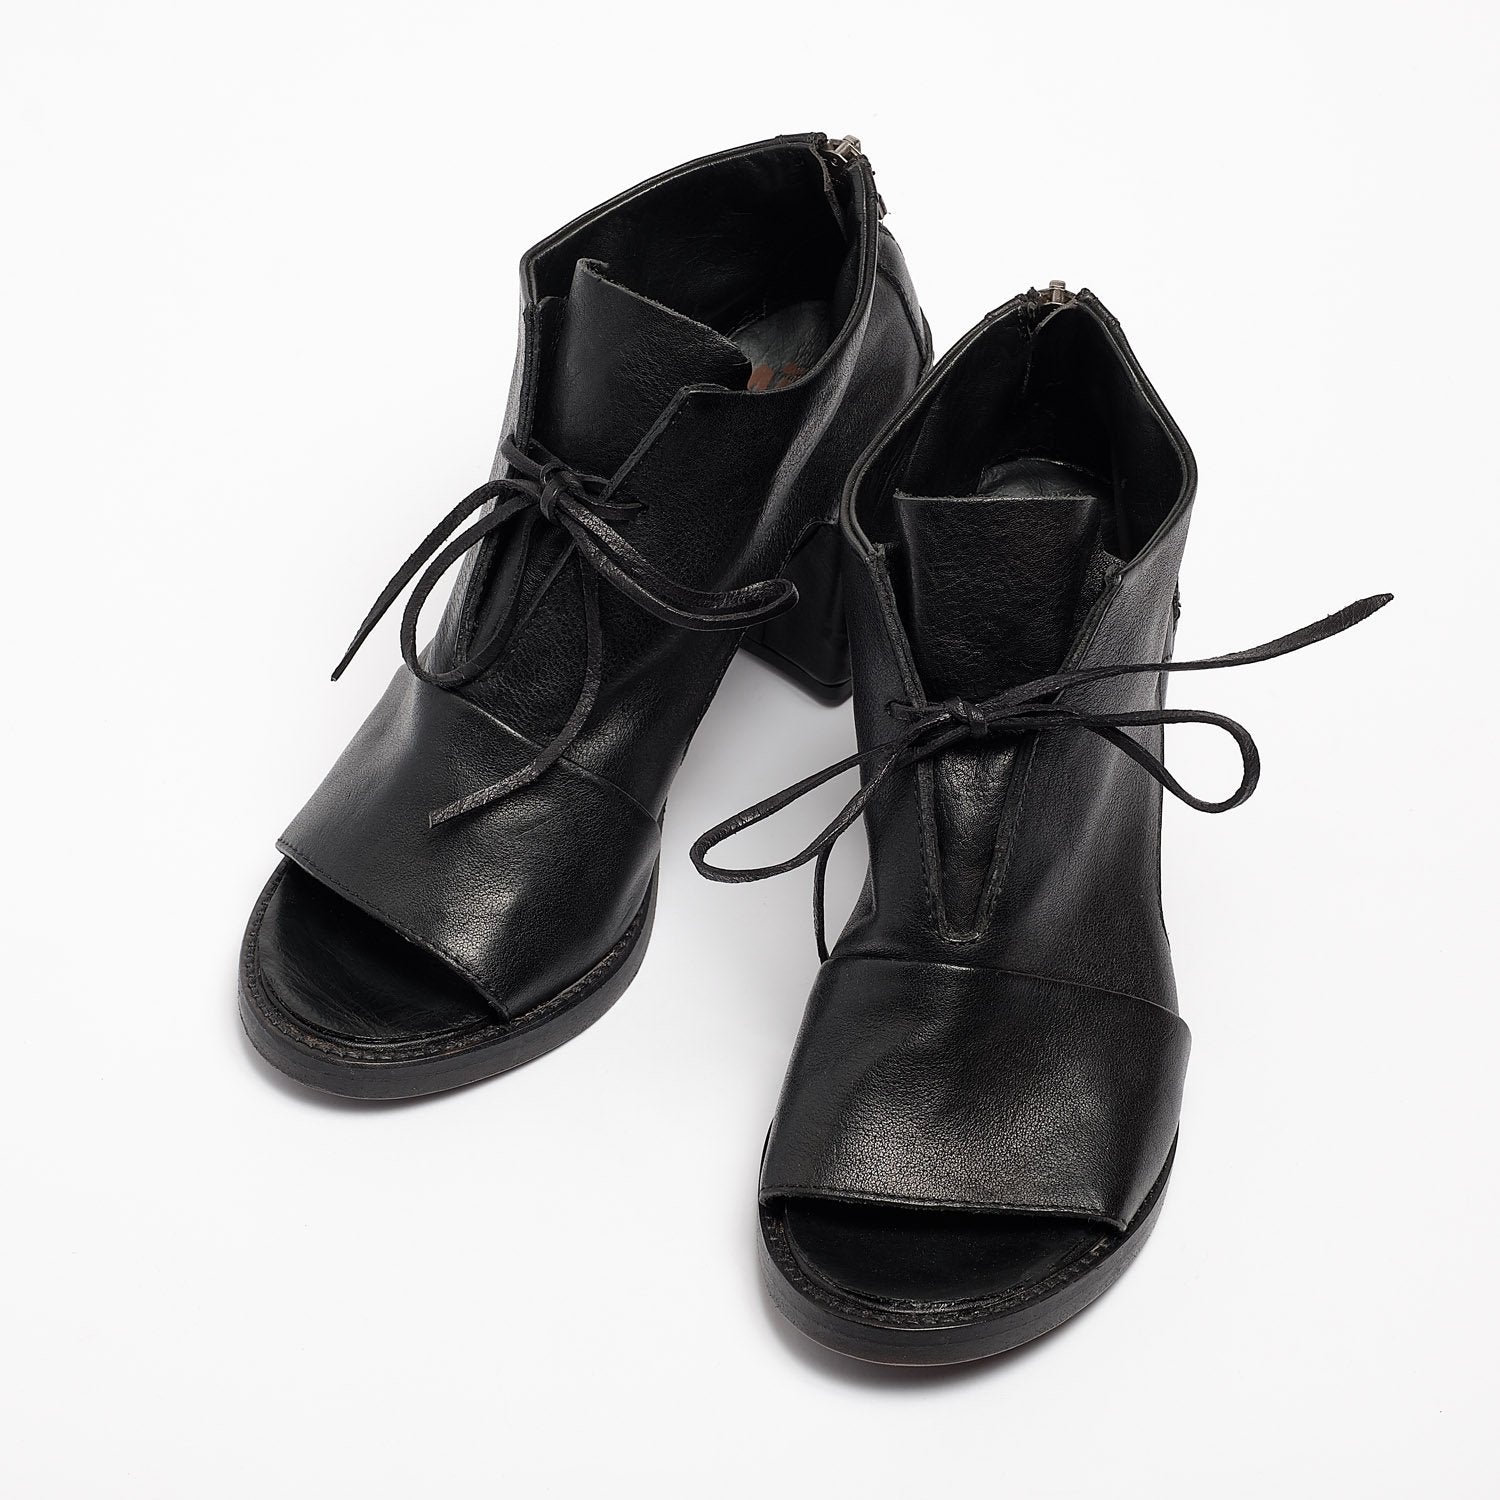 Diaz Laced Open Shoes natural vacchetta leather black